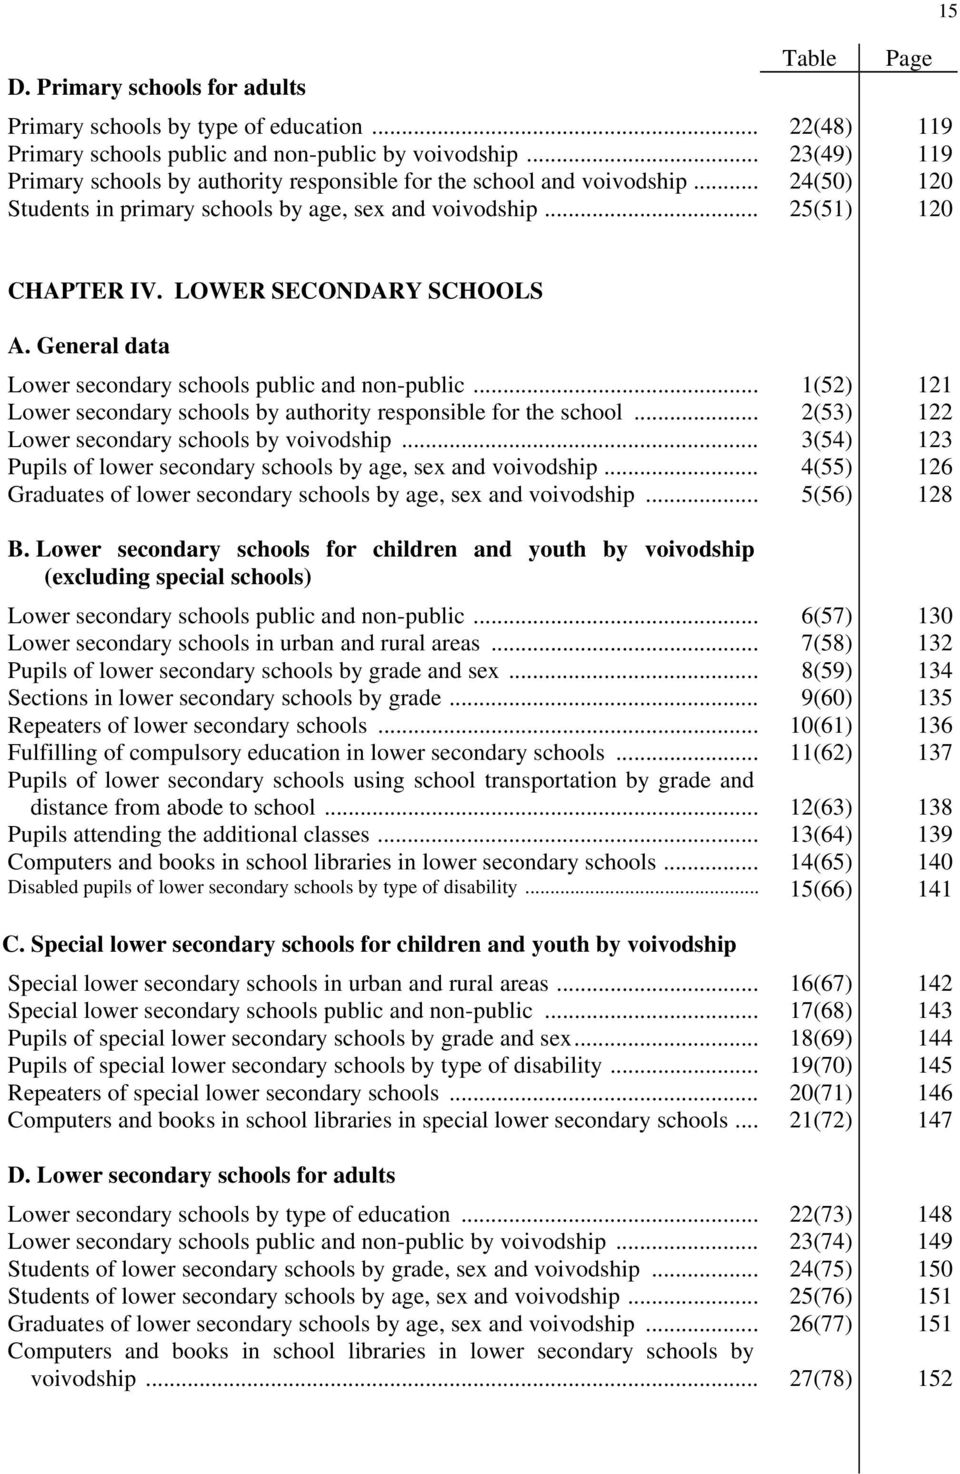 General data Lower secondary schools public and non-public... Lower secondary schools by authority responsible for the school... Lower secondary schools by voivodship.